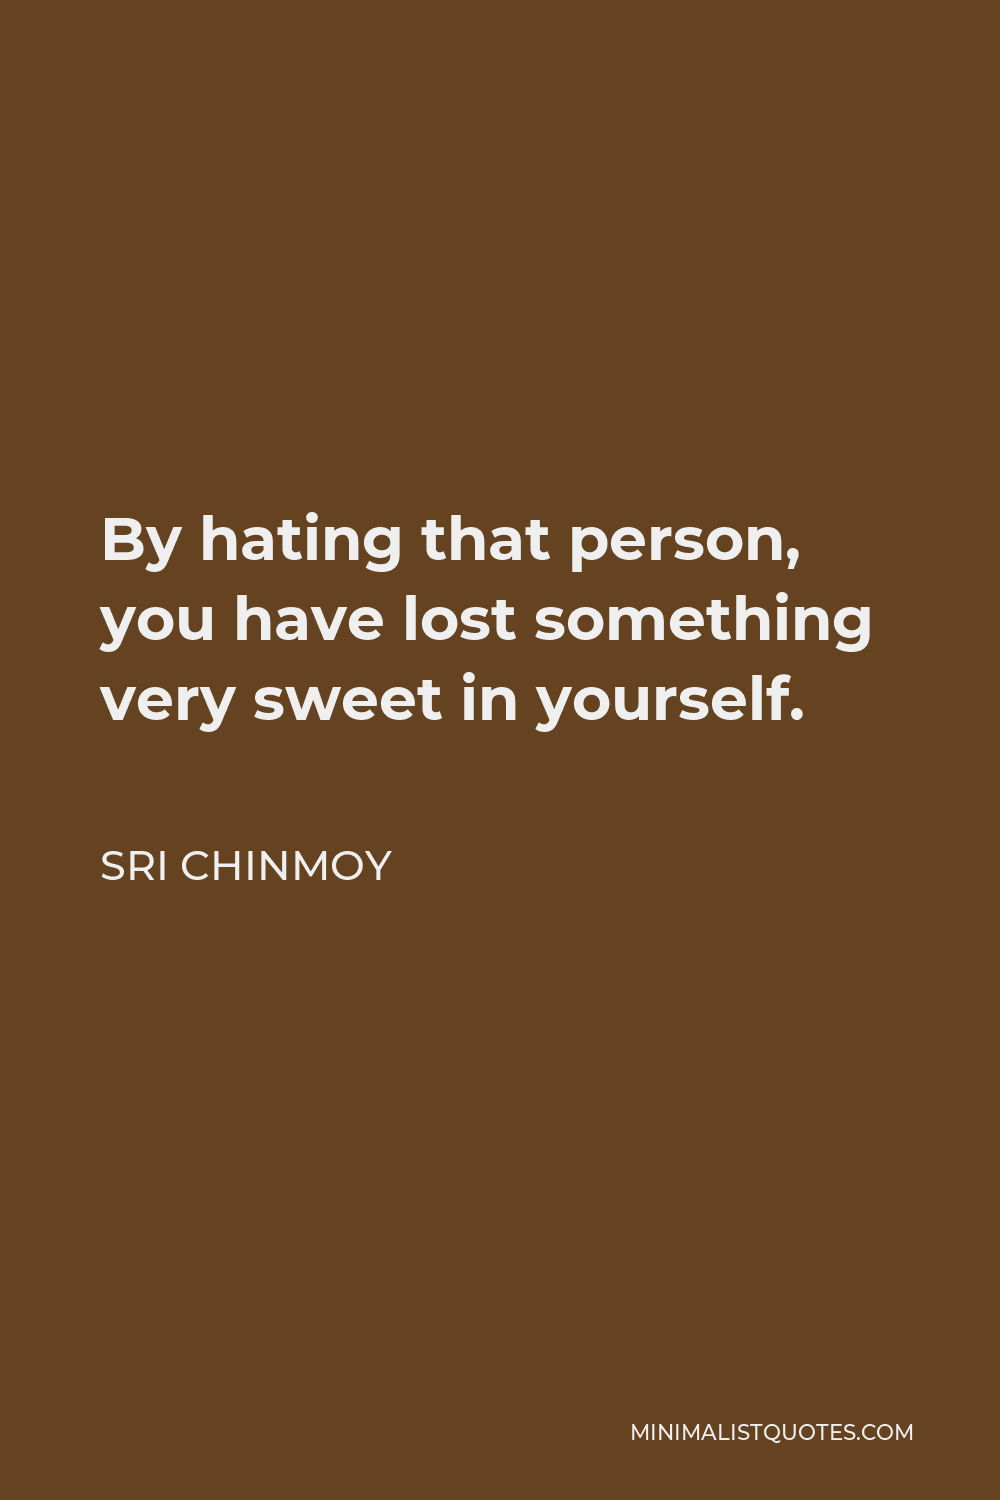 Sri Chinmoy Quote - By hating that person, you have lost something very sweet in yourself.